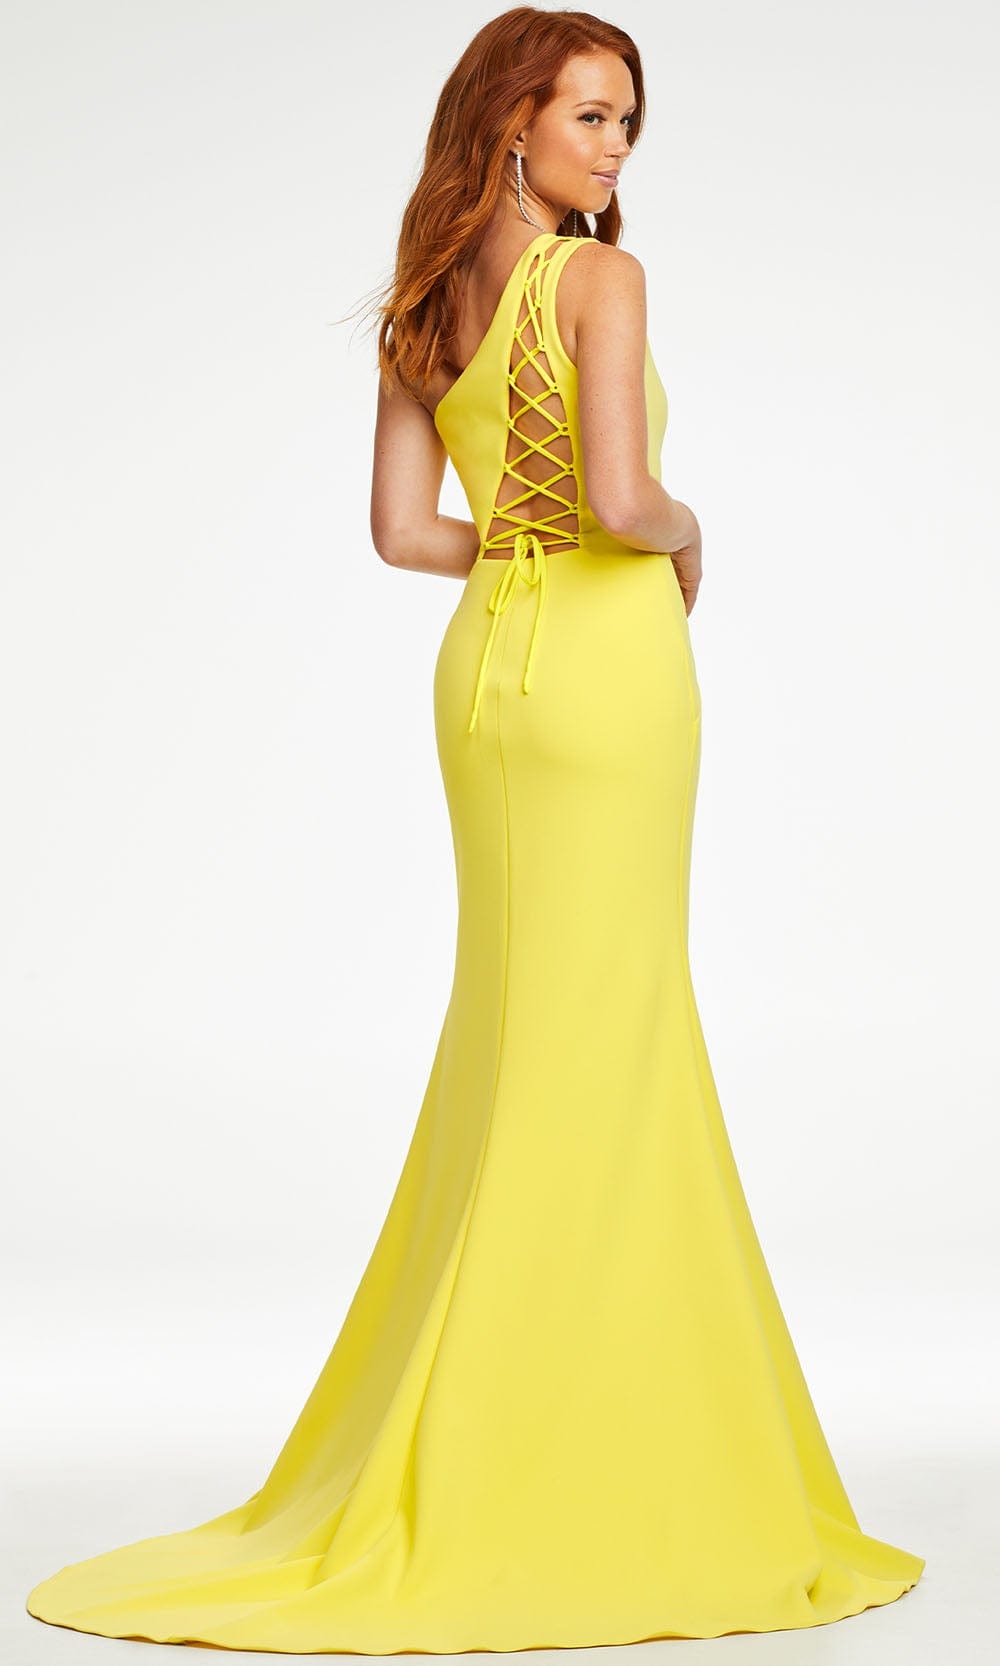 Ashley Lauren - 11119 One Shoulder Lace Up Gown Special Occasion Dress